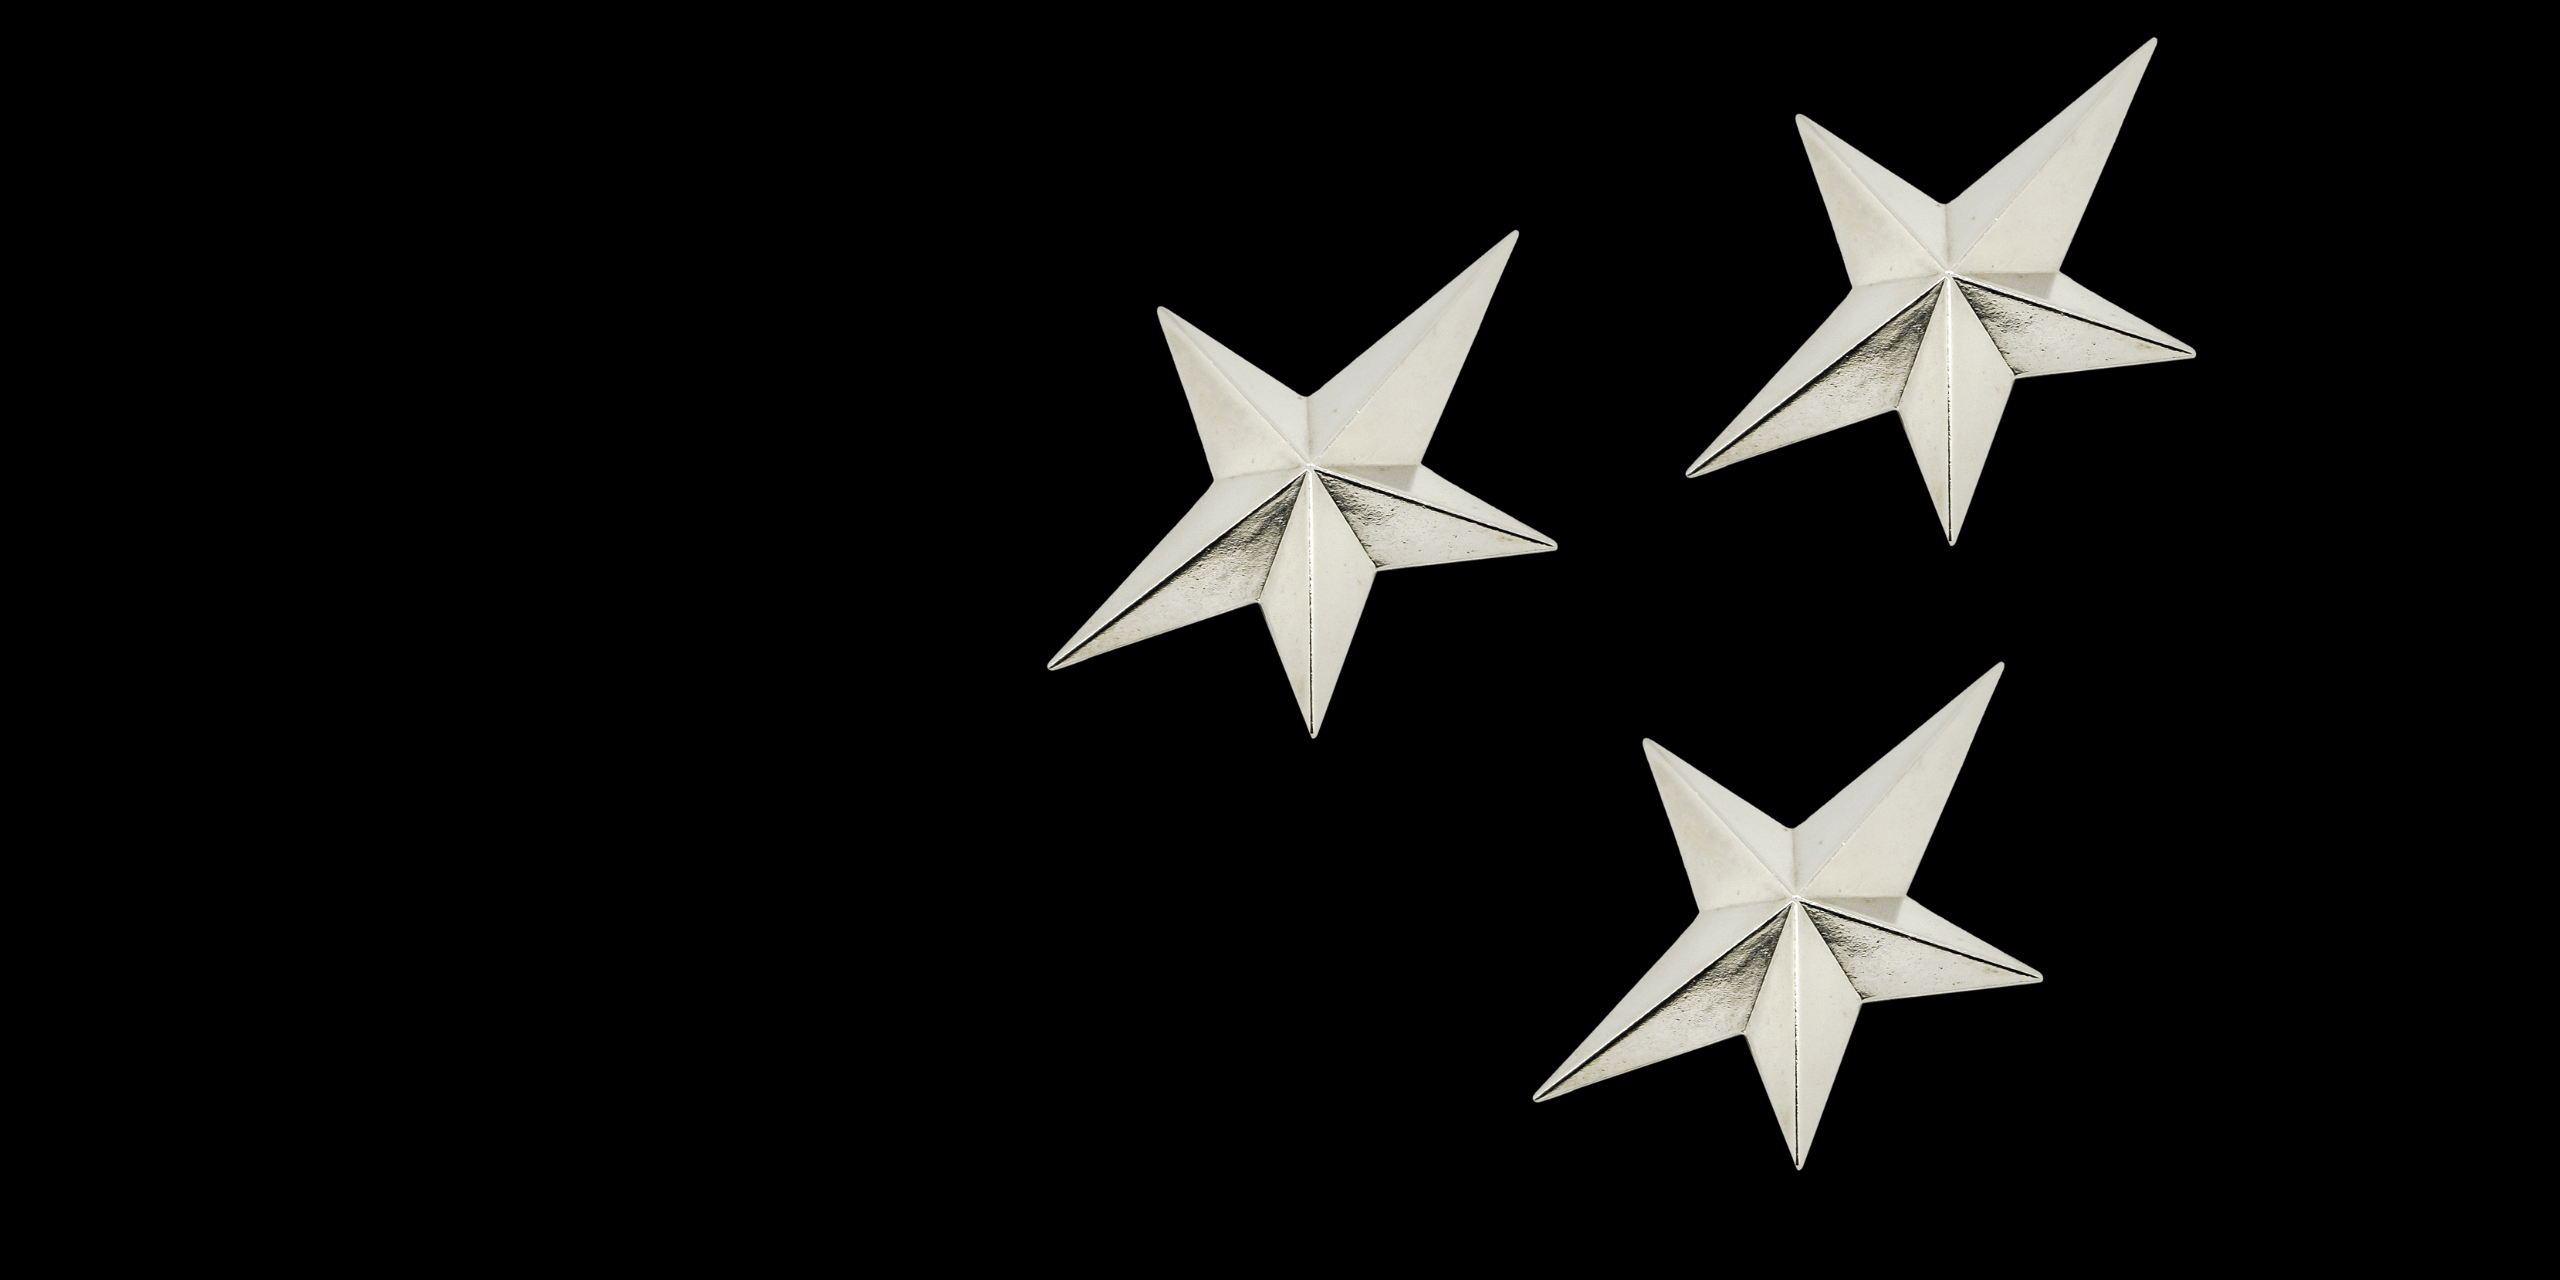 Vacuum Casted Stars for Thierry Mugler